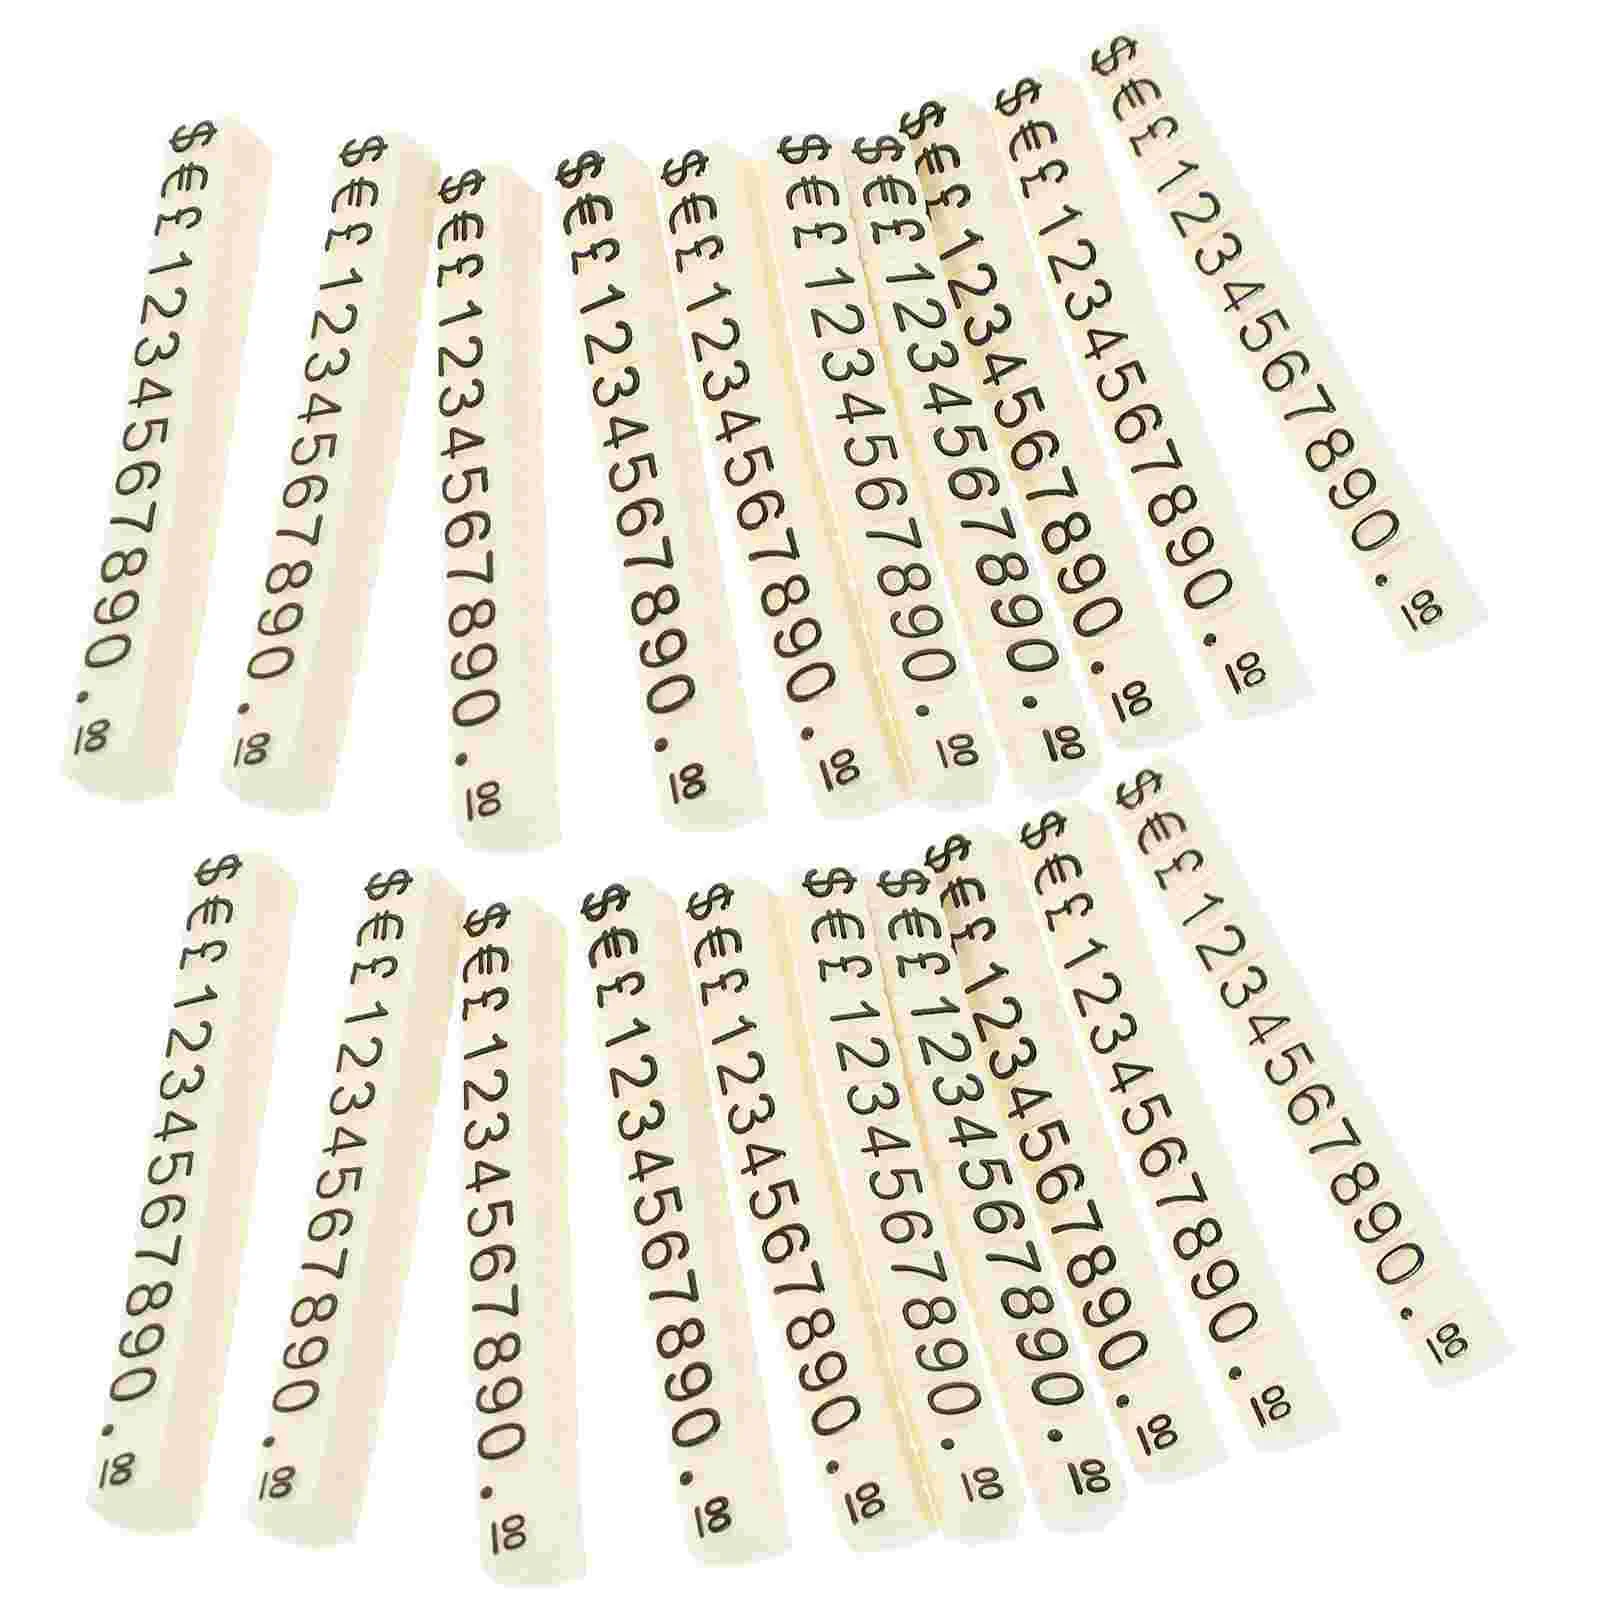 

20 Pcs Price Tag Jewelry Cube Sticker Labels Tags Stand Jewlery for Pricing Adjustable Display